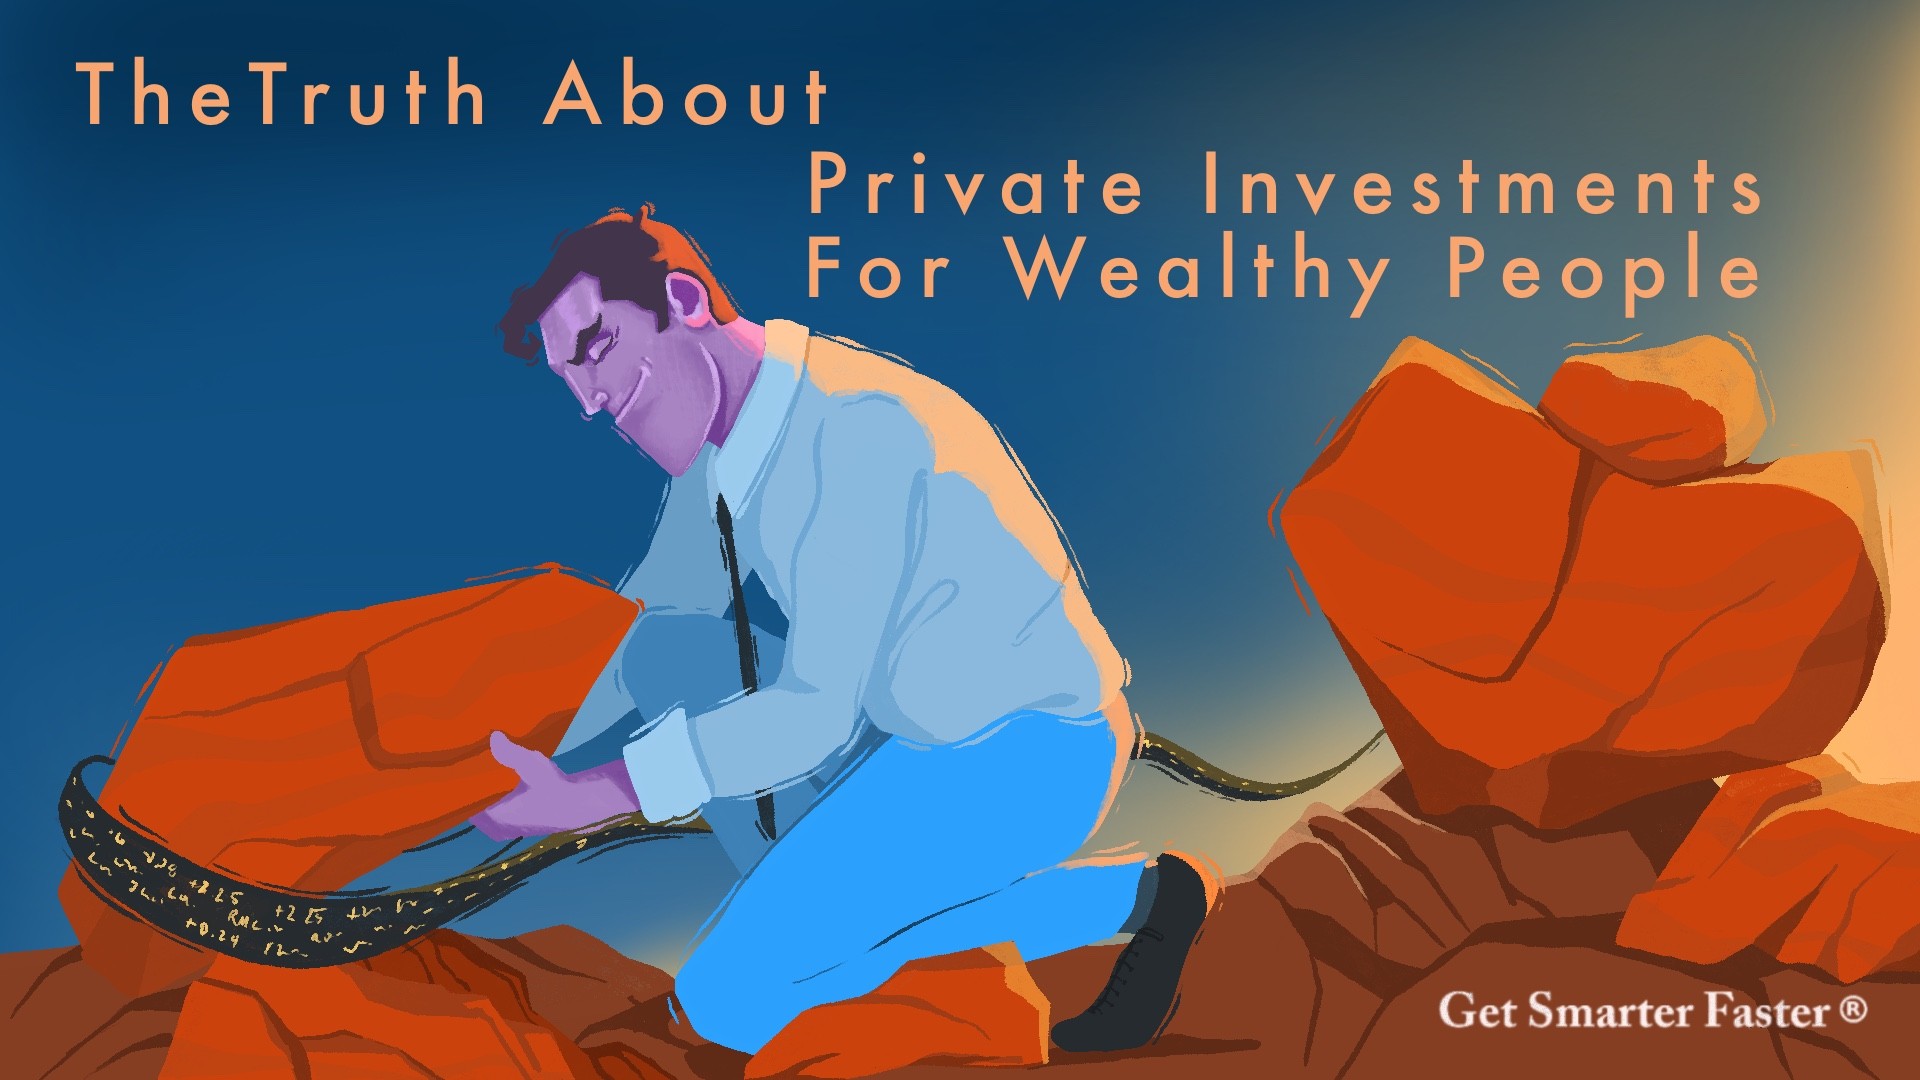 The Truth About Private Investments For Wealthy People